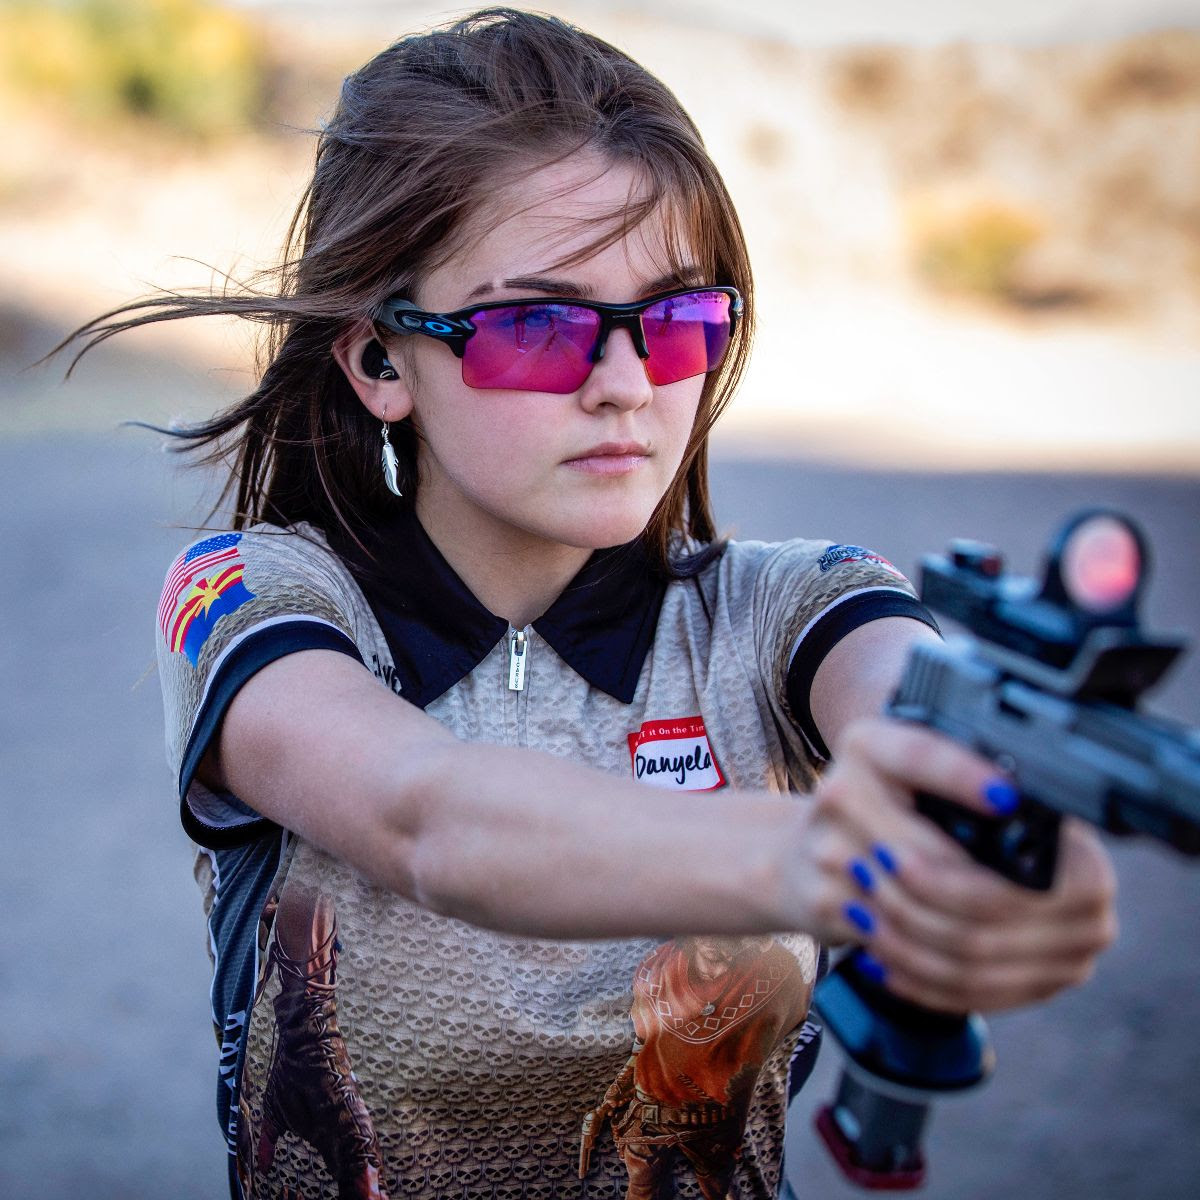 Kahr Firearms Group Welcomes Pro-Shooter Danyela D’Angelo